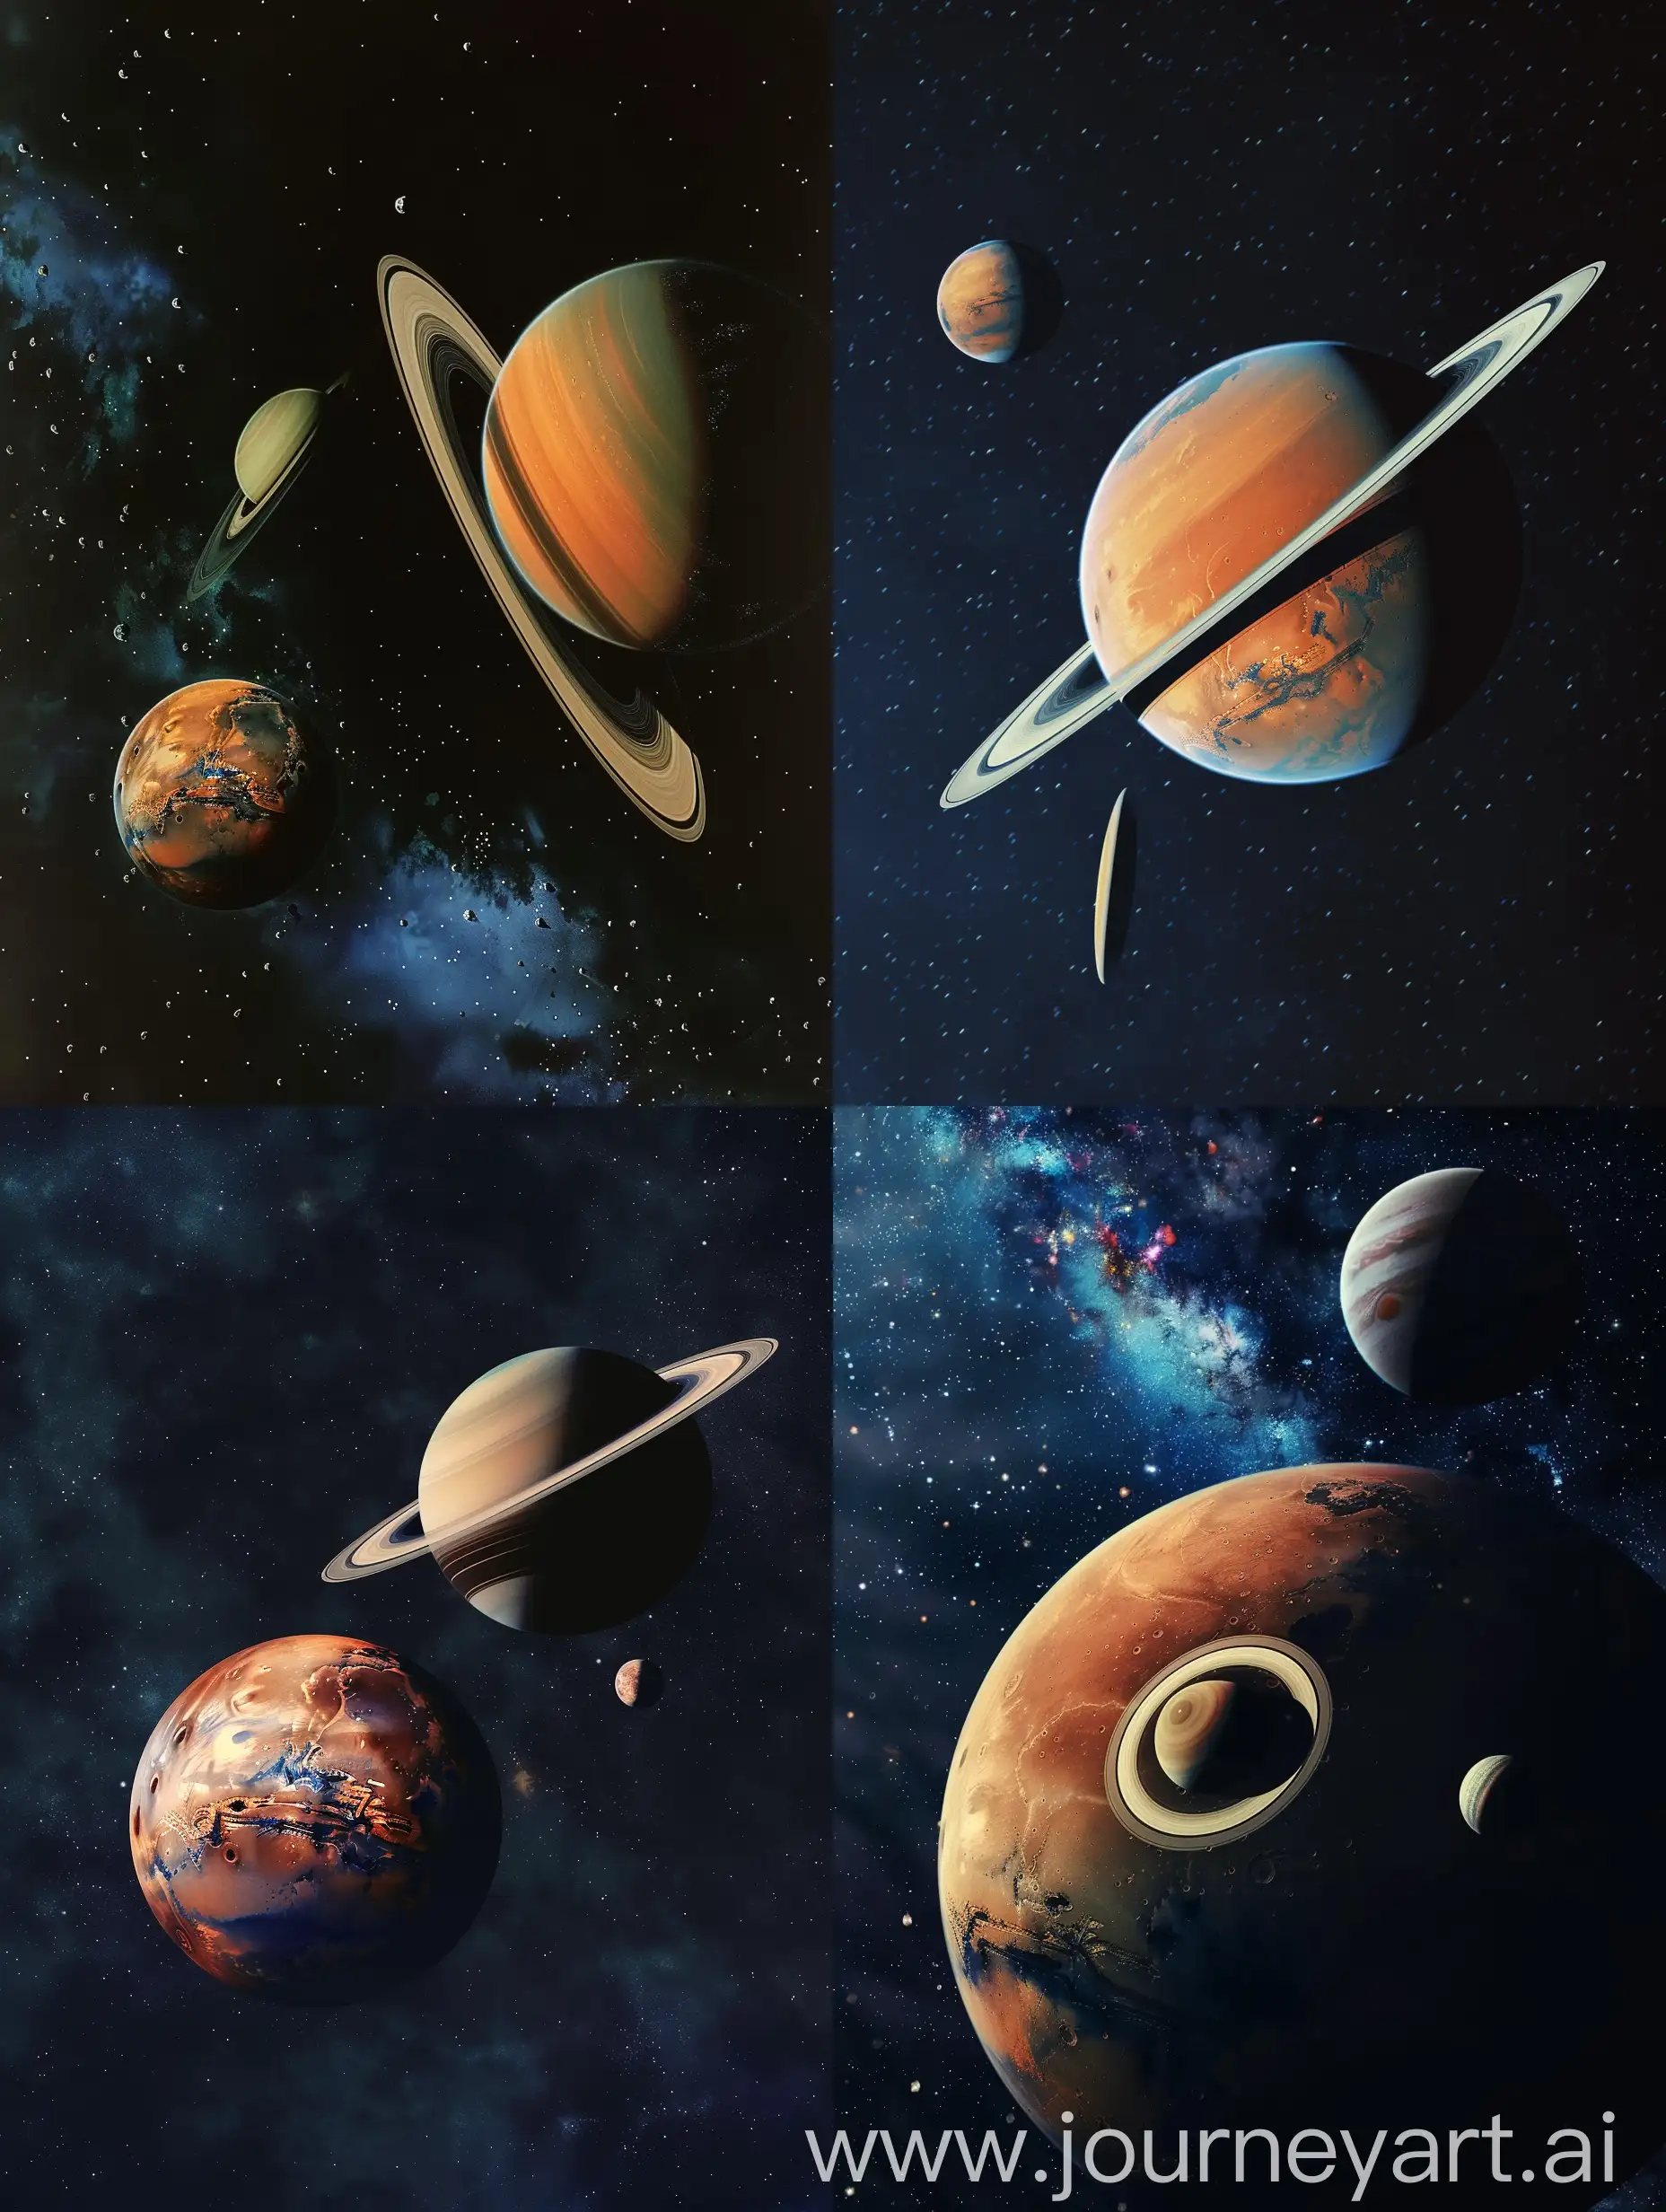 the convergence of the planets Mars and Saturn in space